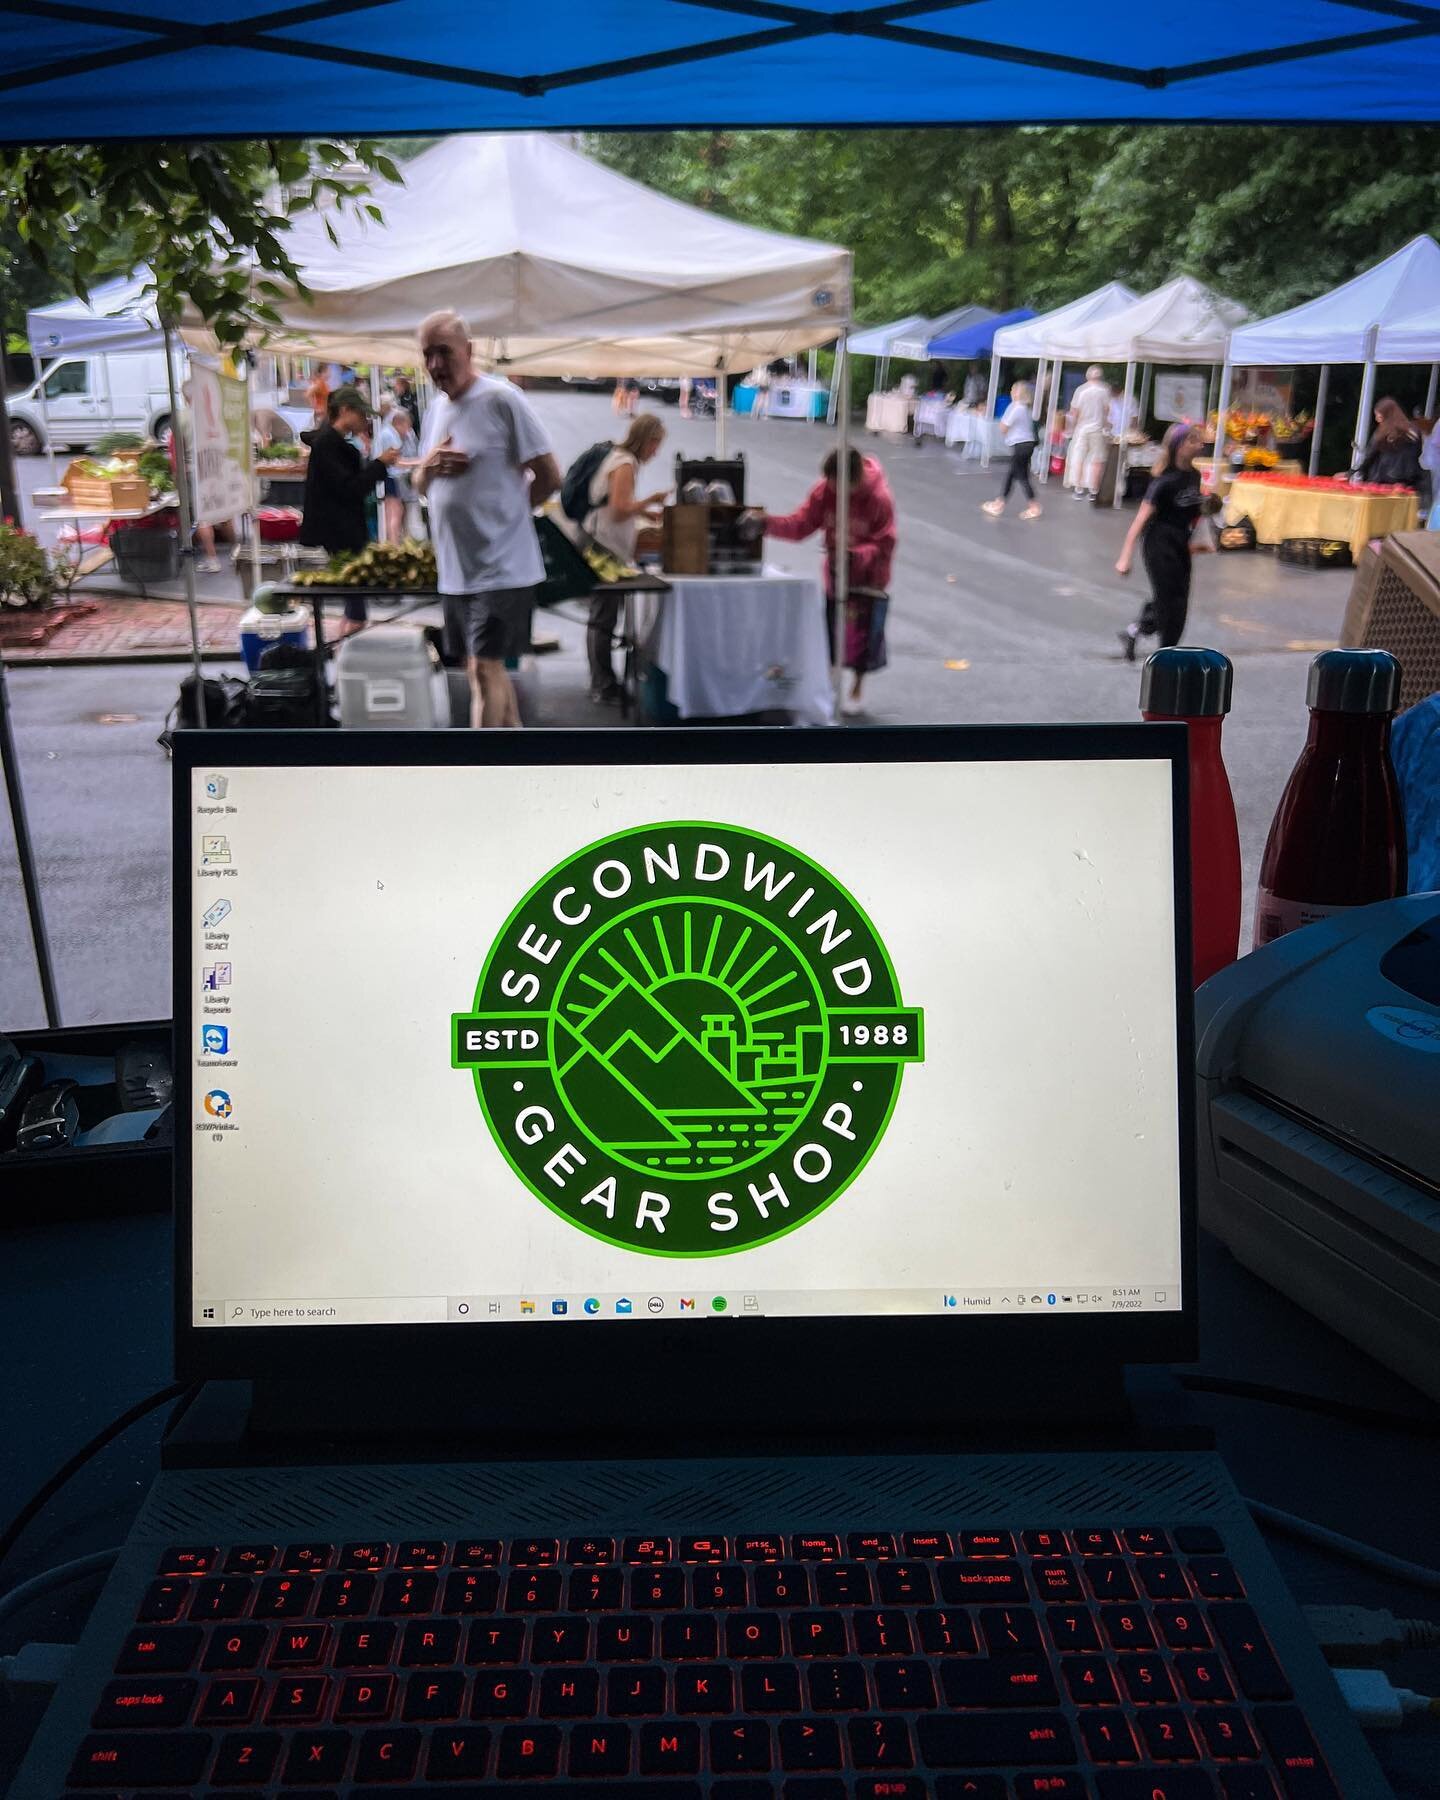 Rain or shine! We&rsquo;ll be at the Oakhurst Farmers&rsquo; Market tomorrow from 9 till 1pm! Then hanging out with our friends at @sceptrebeer for the rest of the afternoon! Come say hello and bring in gear to sell! #helpkeepgoodgeargoingstrong #oak